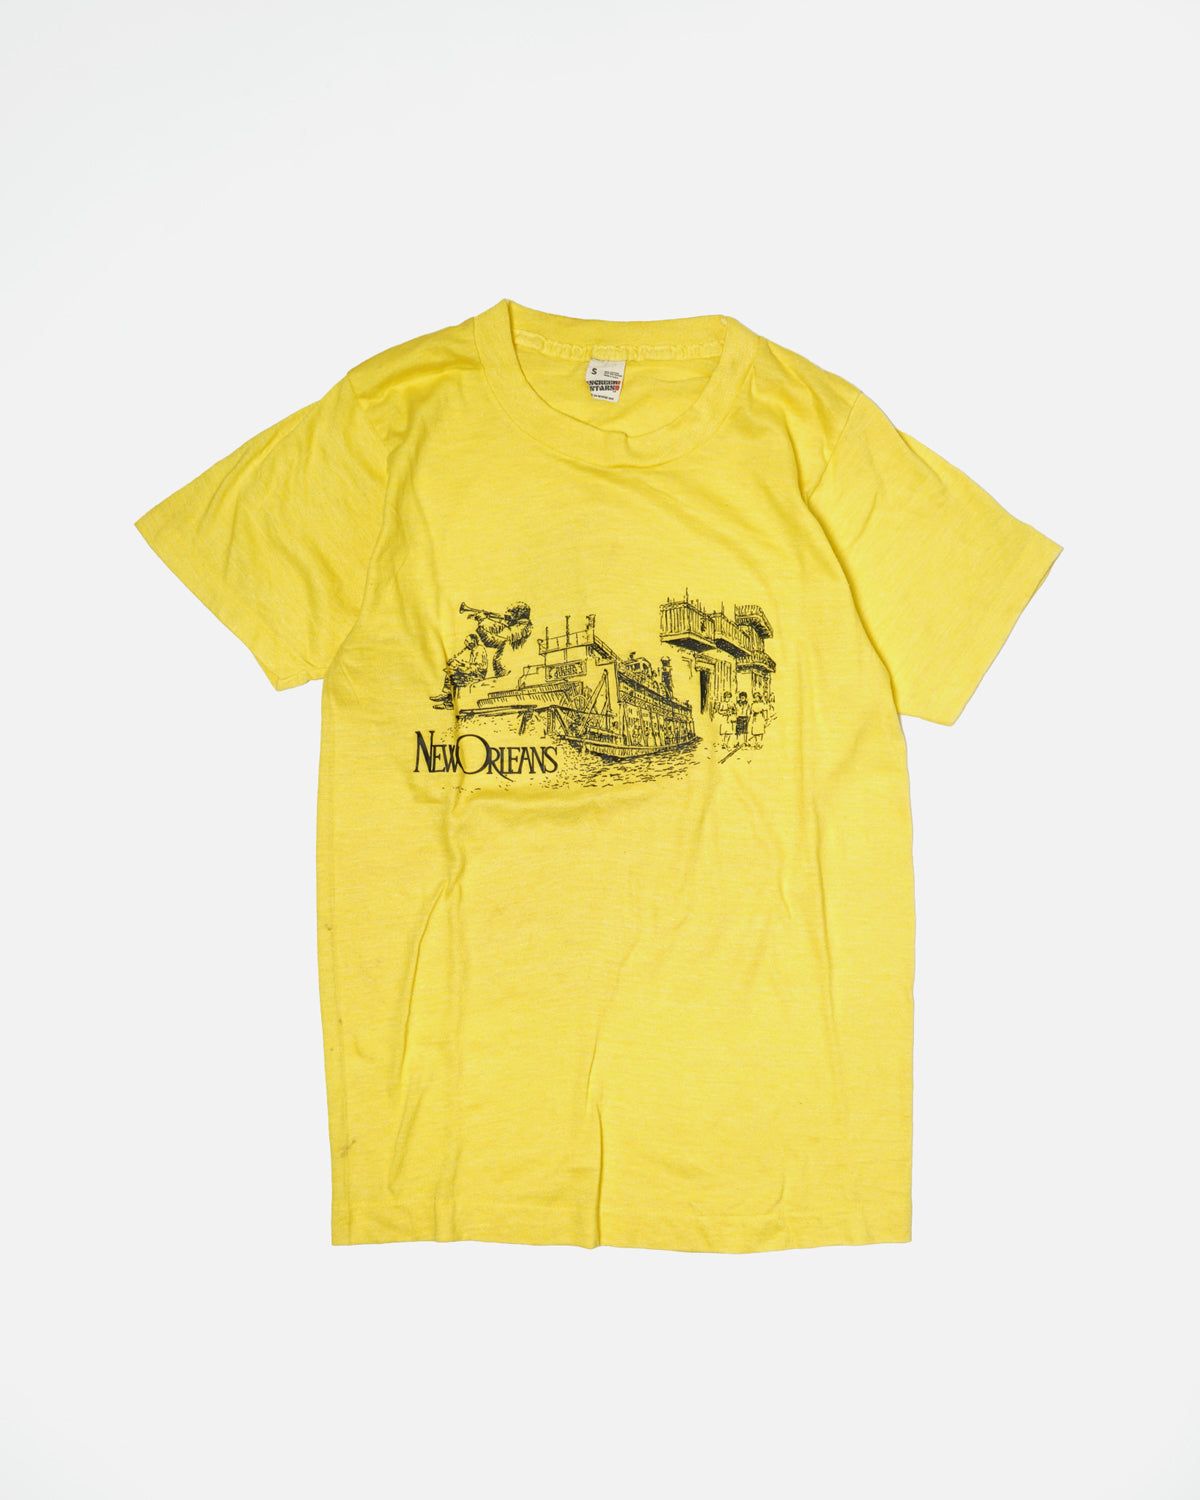 Graphic Tee / New Orleans